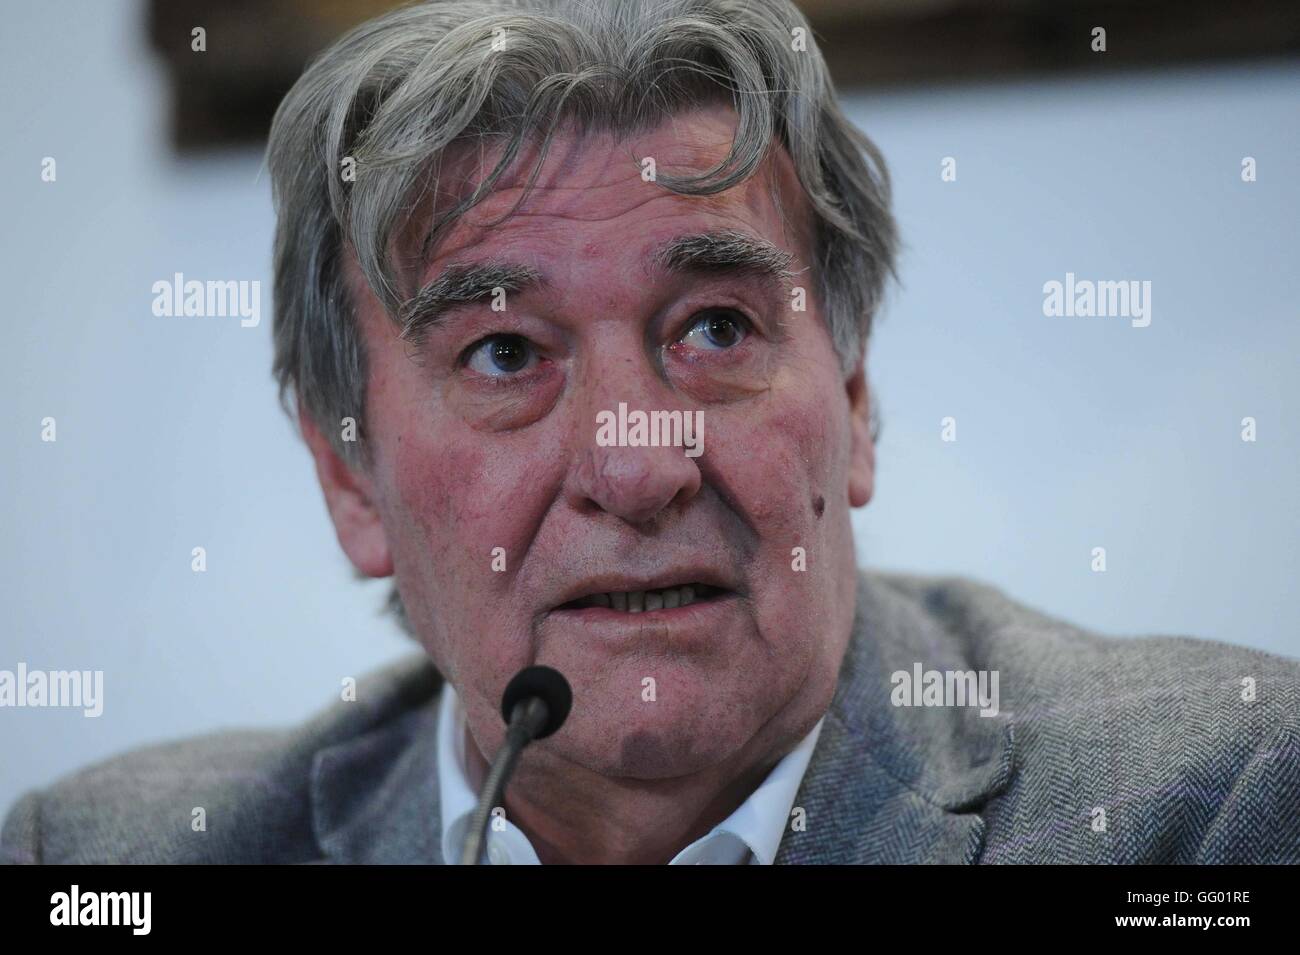 Buenos Aires, Argentina. 1st Aug, 2016. Armando Perez, Chairman of the Regularization Committee of Argentina's Football Association (AFA), takes part in a press conference in Buenos Aires, Argentina, Aug. 1, 2016. Edgardo Bauza was named coach to run the national team at the press conference Monday. © Alejandro Santa Cruz/TELAM/Xinhua/Alamy Live News Stock Photo